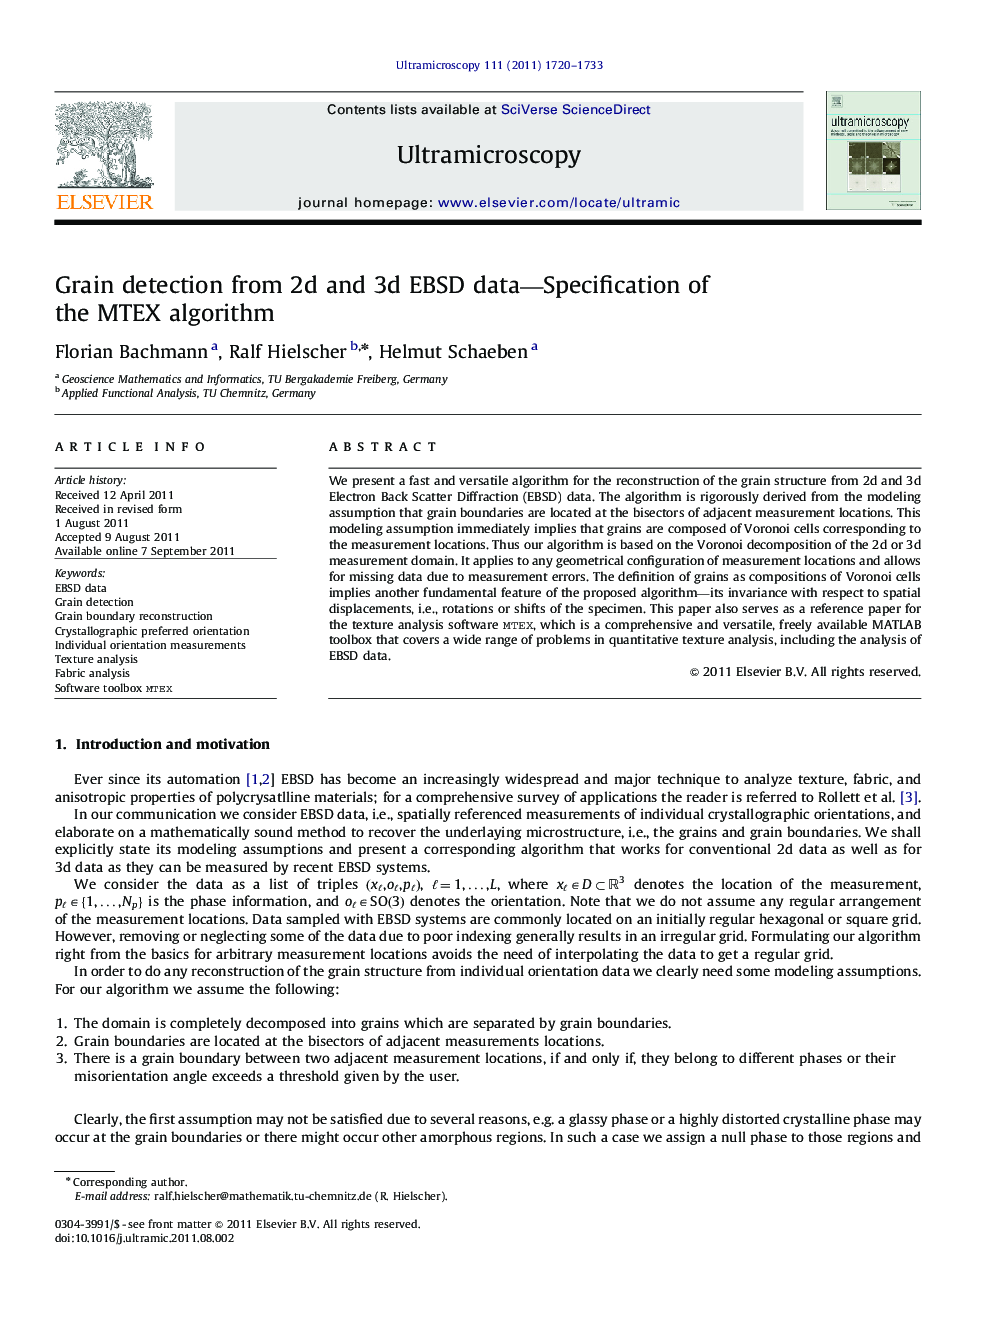 Grain detection from 2d and 3d EBSD data-Specification of the MTEX algorithm